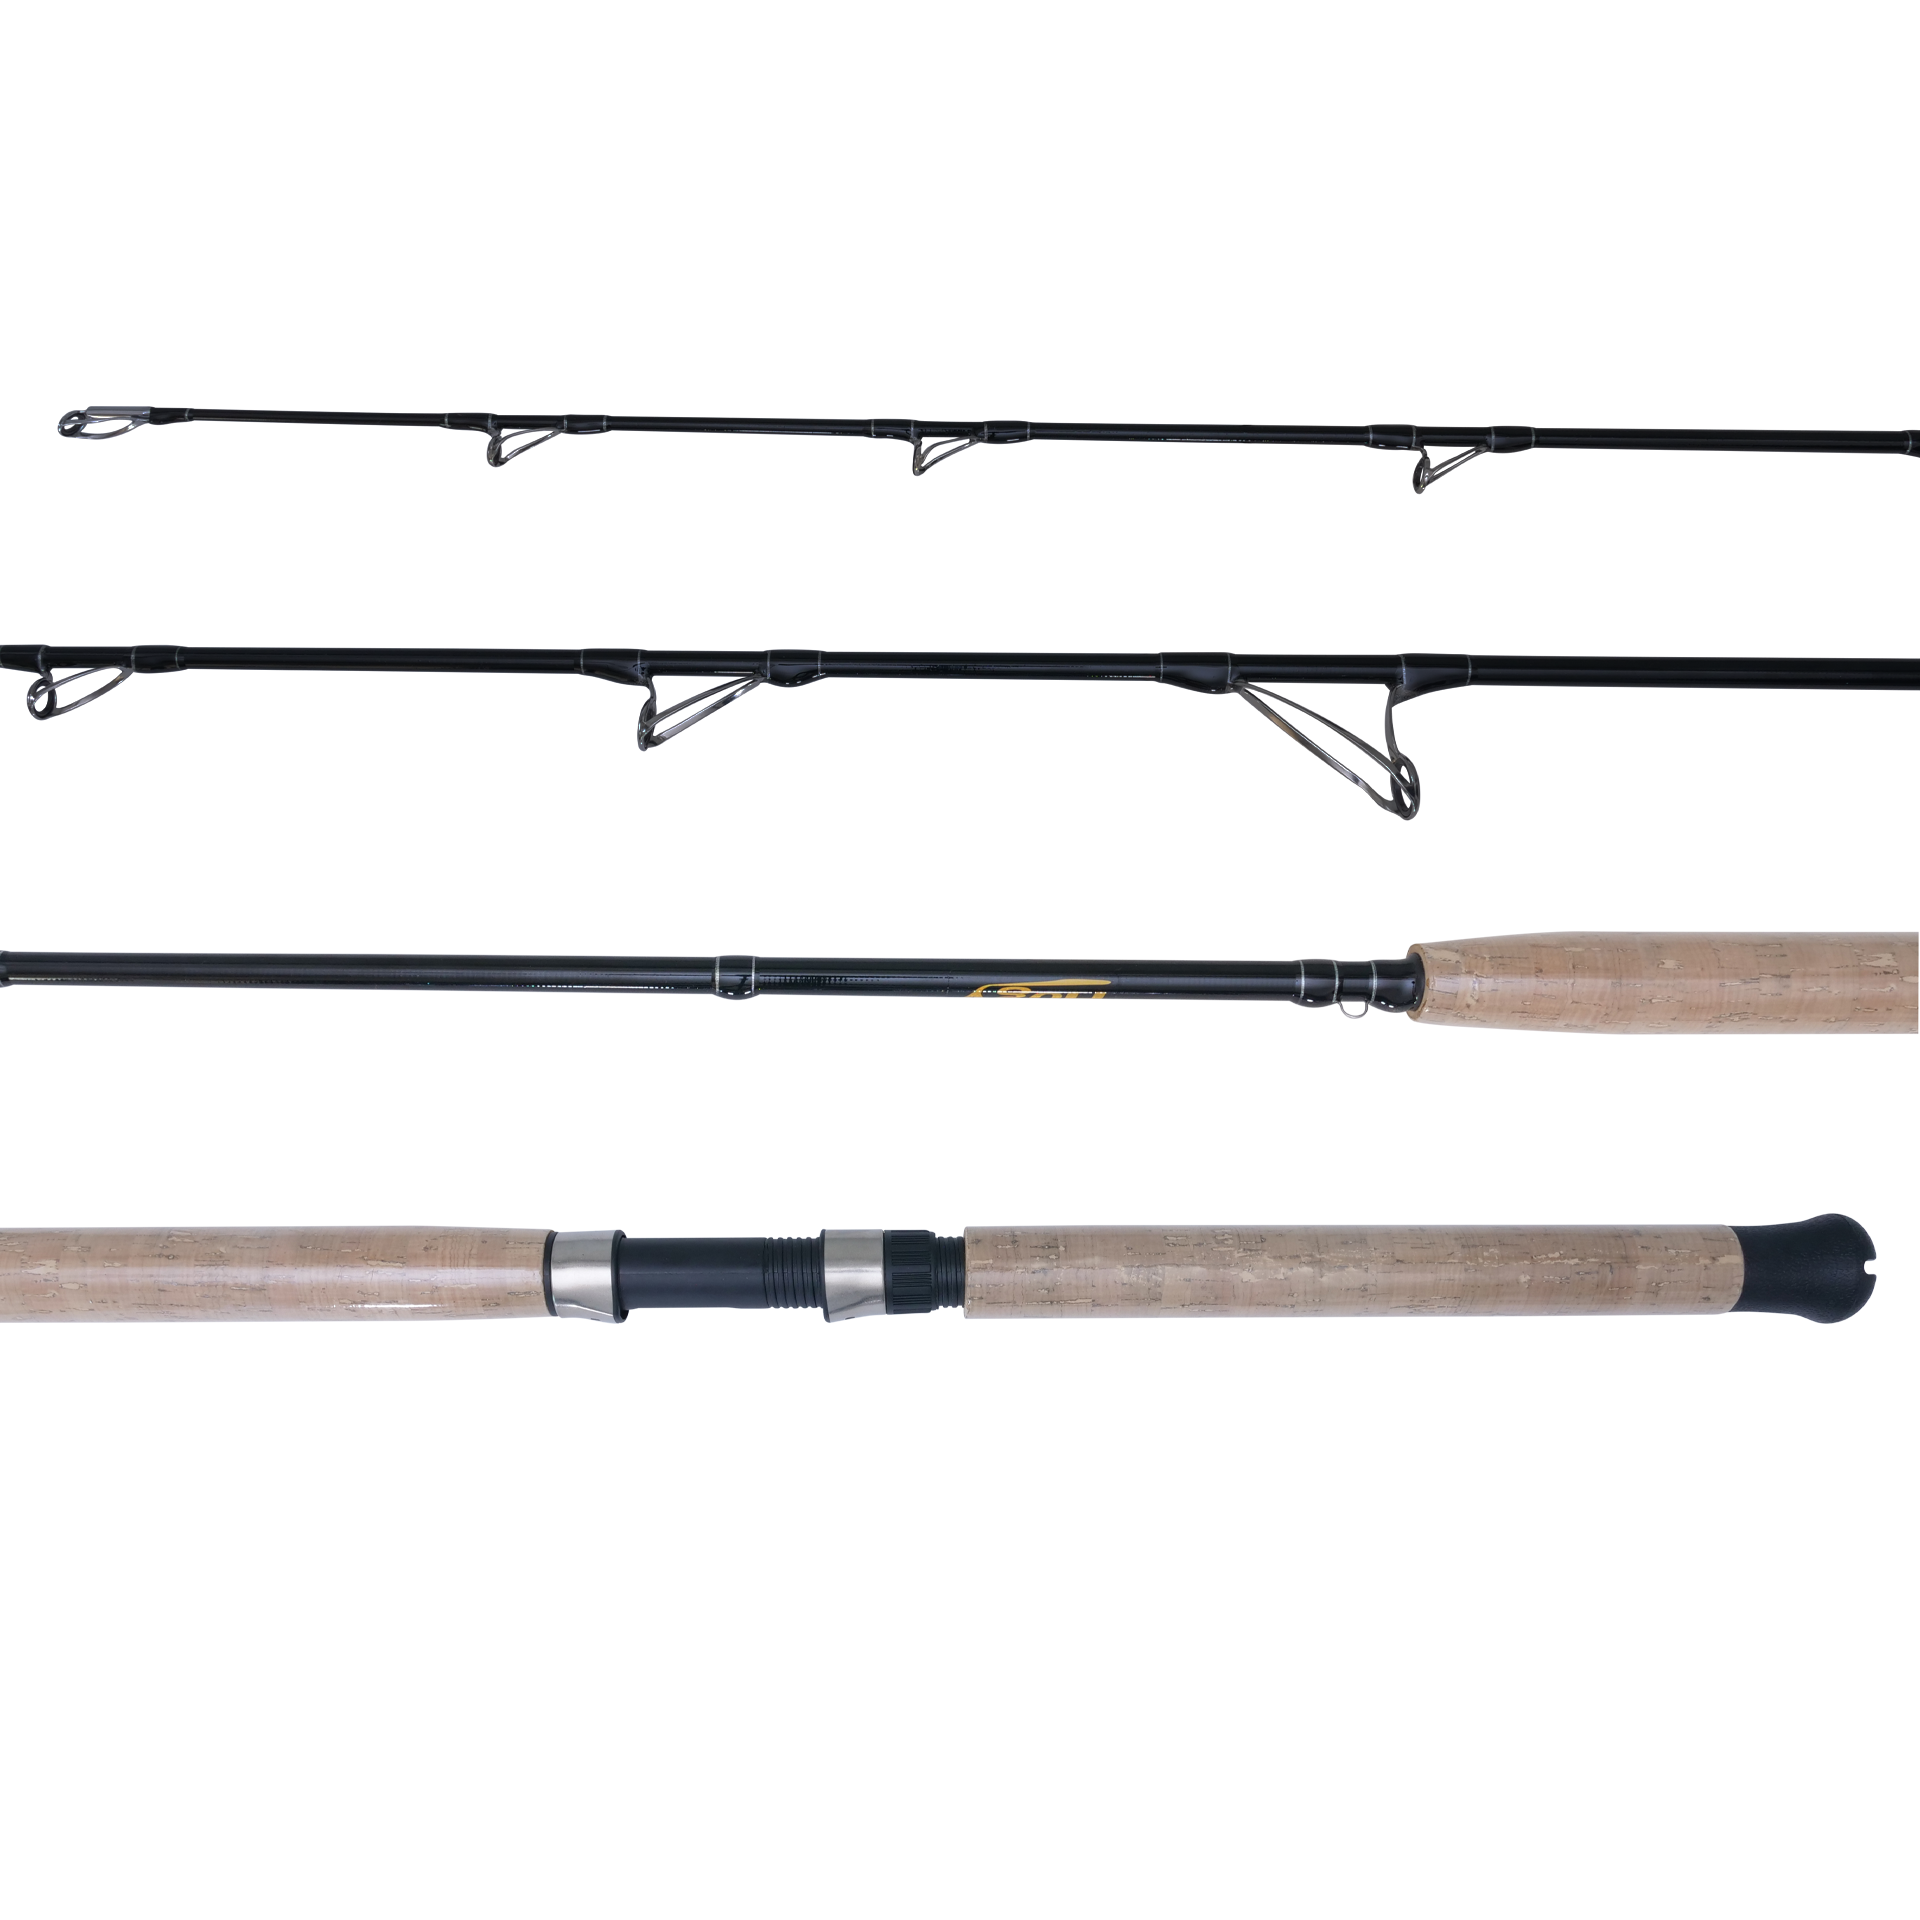 Pre-Order: Tuna Casting Spinning Rod: Mod-Fast Action 7' H (3oz - 8oz) (Ship Date 4/22)